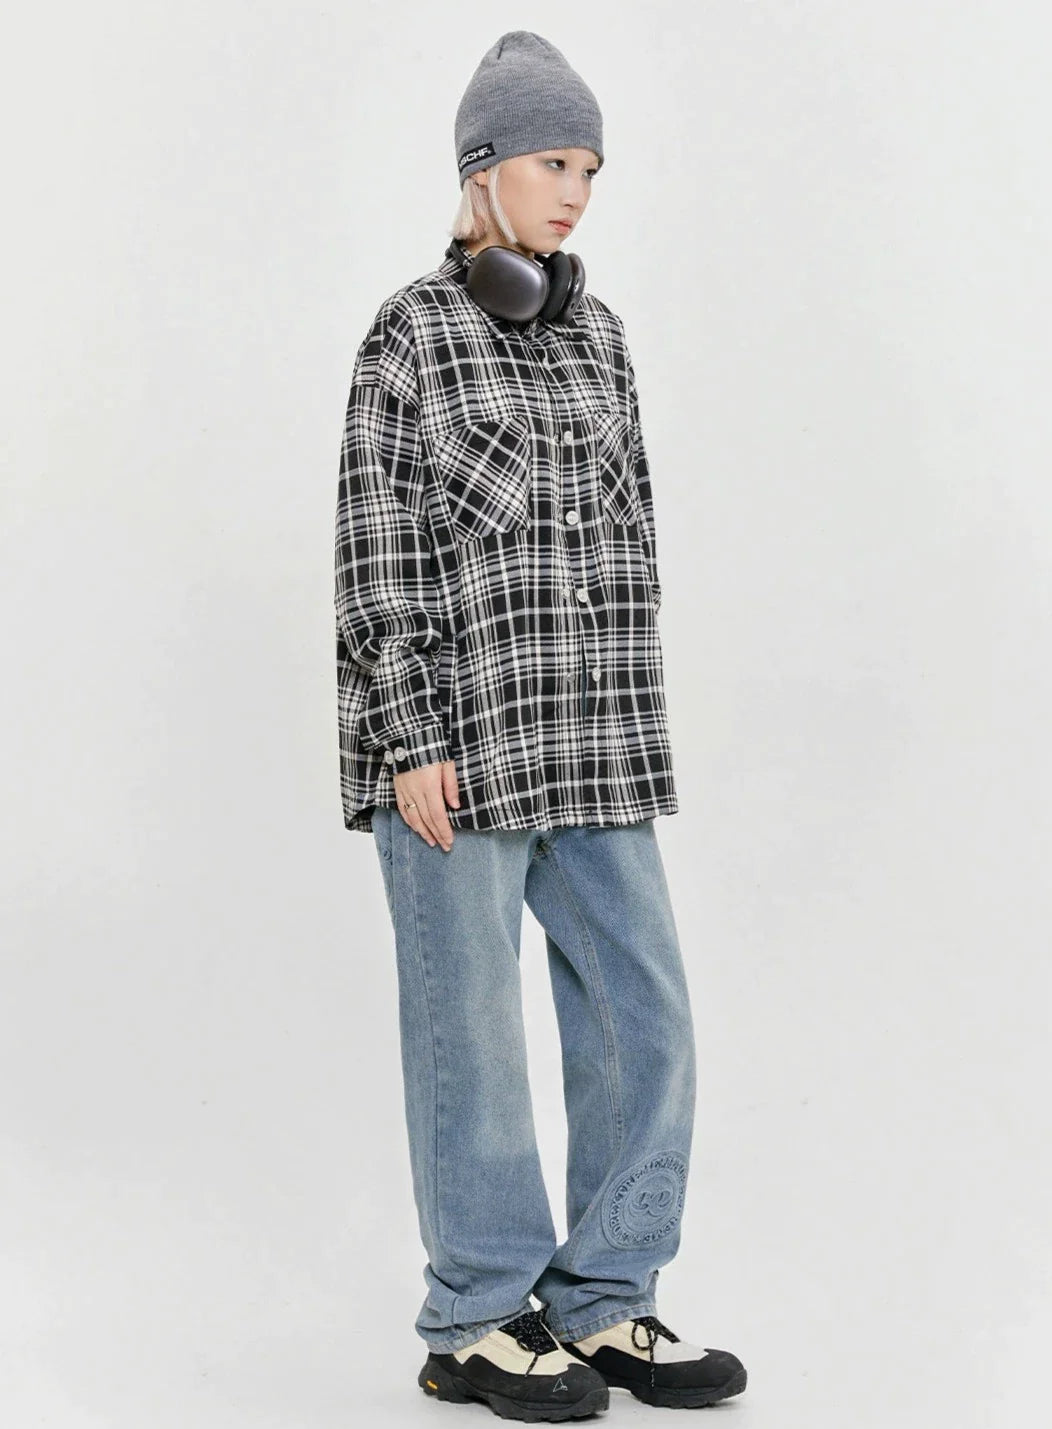 Made Extreme Casual Breast Pocket Plaid Long Sleeve Shirt Korean Street Fashion Shirt By Made Extreme Shop Online at OH Vault